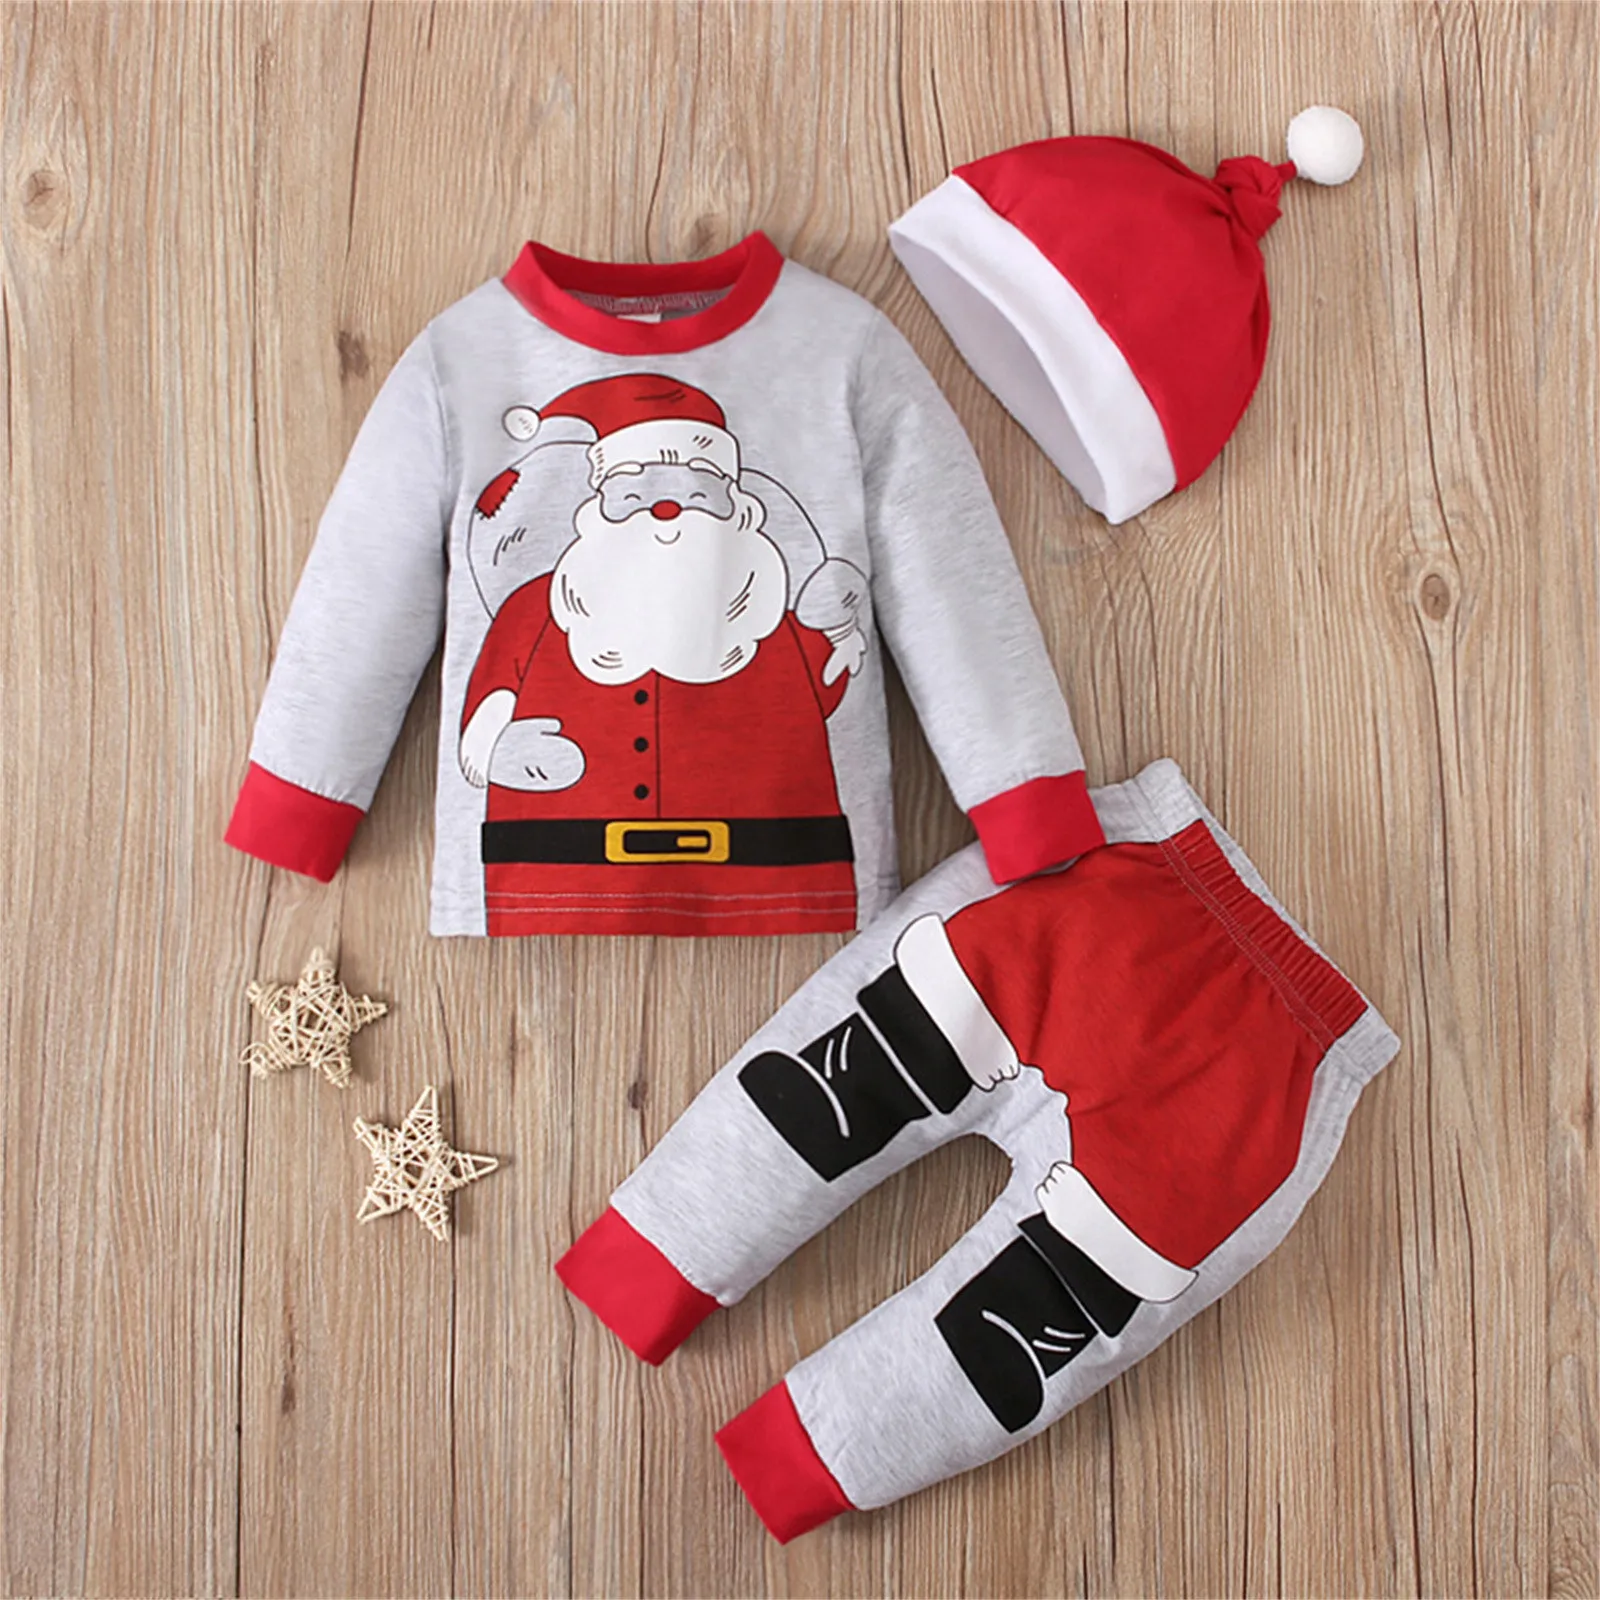 

Little Girl Outfits with Hats Infant Girls Baby Boys Clothes Set Christmas Santa Clause 2 Month Old Hair Mom Baby Elephant